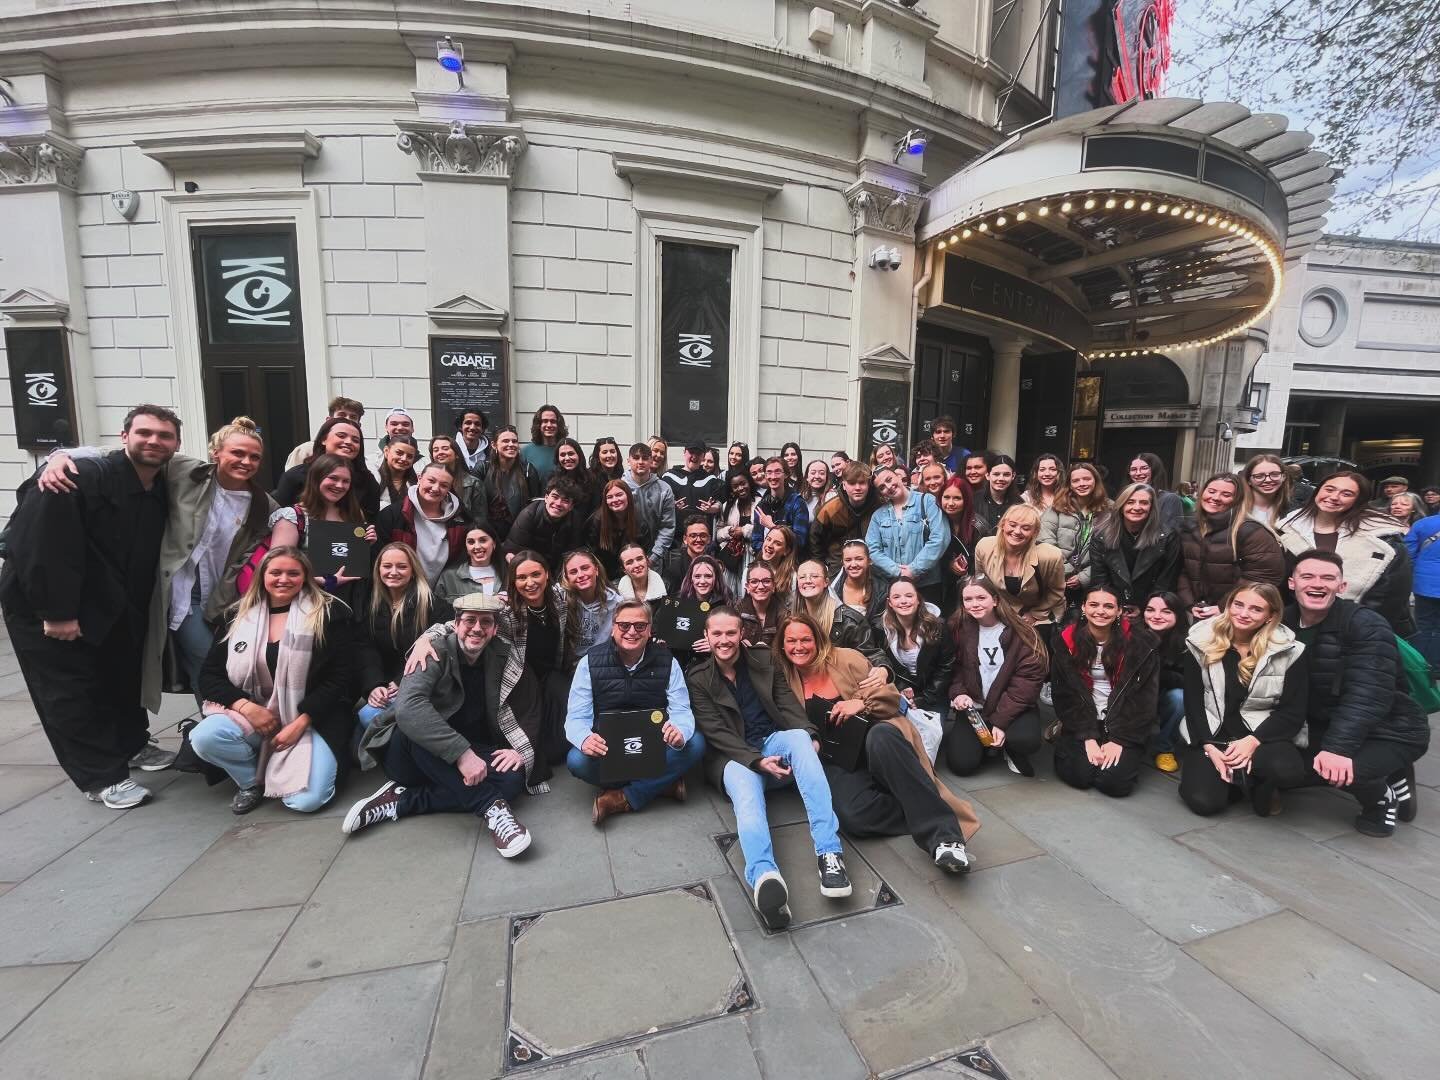 Fabulous day at the @kitkatclubldn watching the incredible Cabaret!
#schooltrip #musicaltheatre #cabaret #london #westend #westebdtheatre #sixthform #college